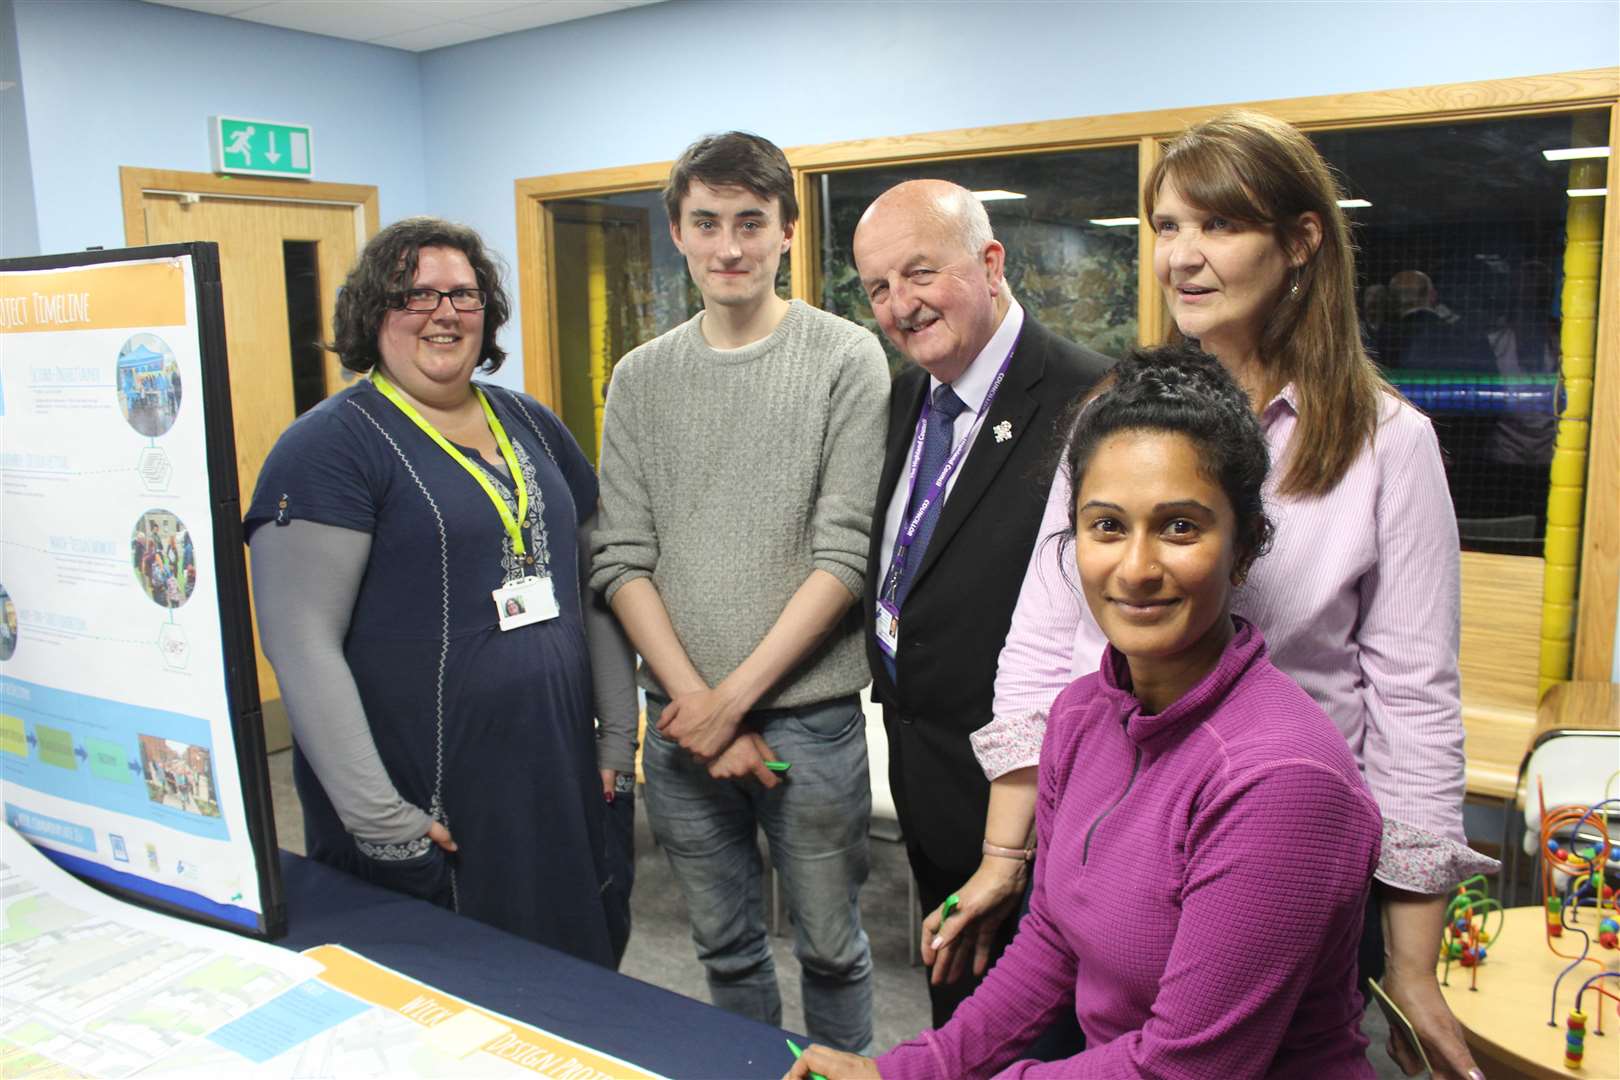 From left: Barbara Kerr (Sustrans), JJ McGuckin (Sustrans), Councillor Willie Mackay (Highland Council), Jennifer Harvey (Pulteneytown People’s Project) and Lavanya Balasubramanian (Sustrans) at the consultation session in the Pulteney Centre.